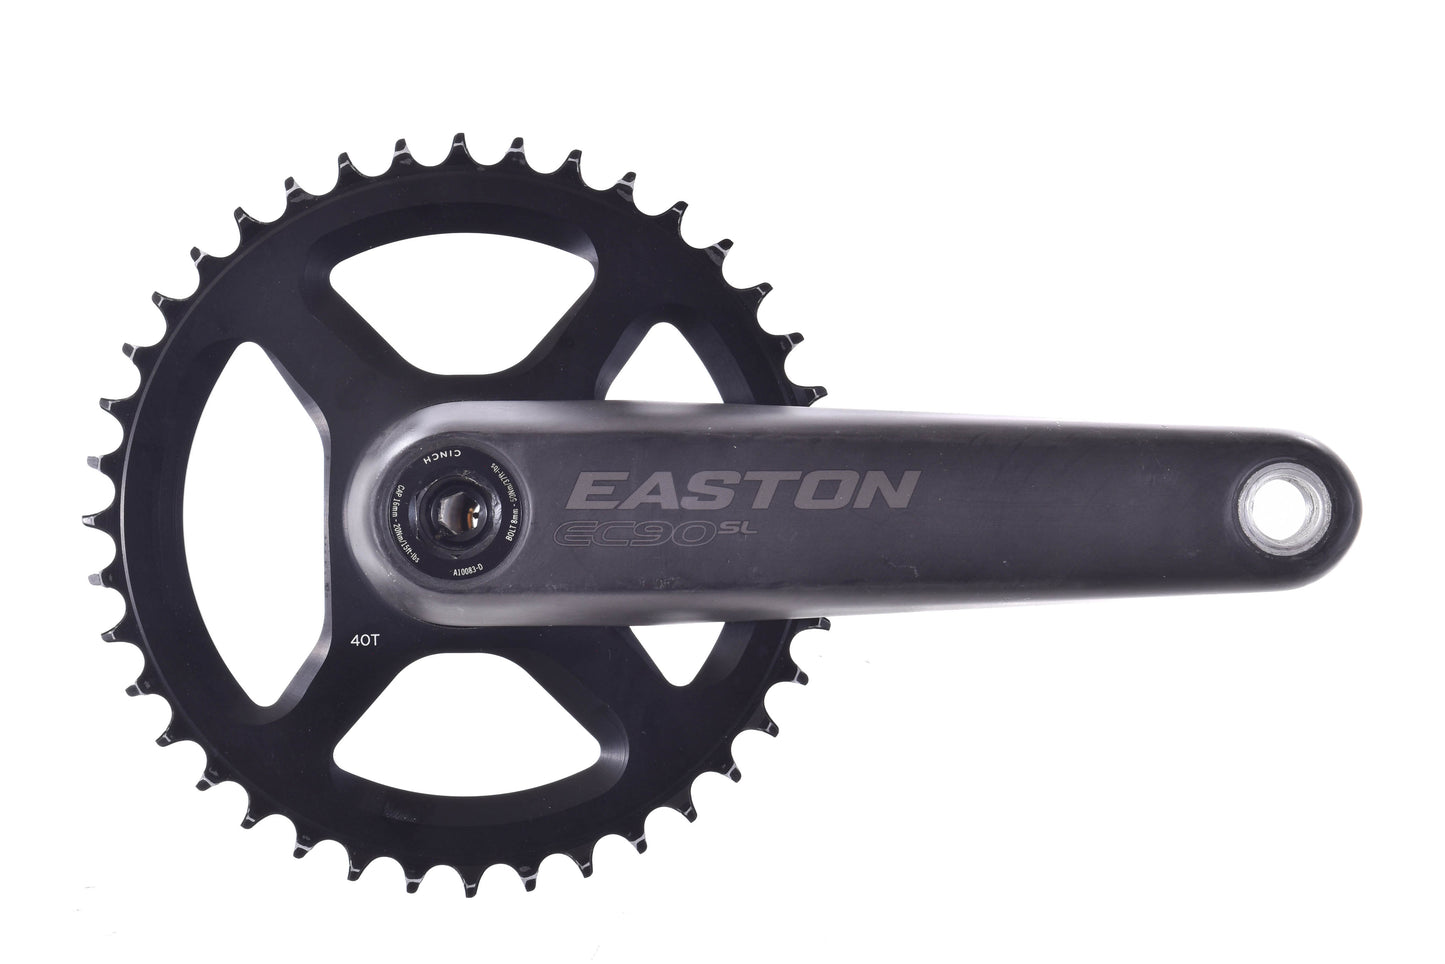 USED Easton EC90 SL 40T 175mm Carbon Crankset 1x 40t CINCH Wolf Tooth 38t Oval Chainring